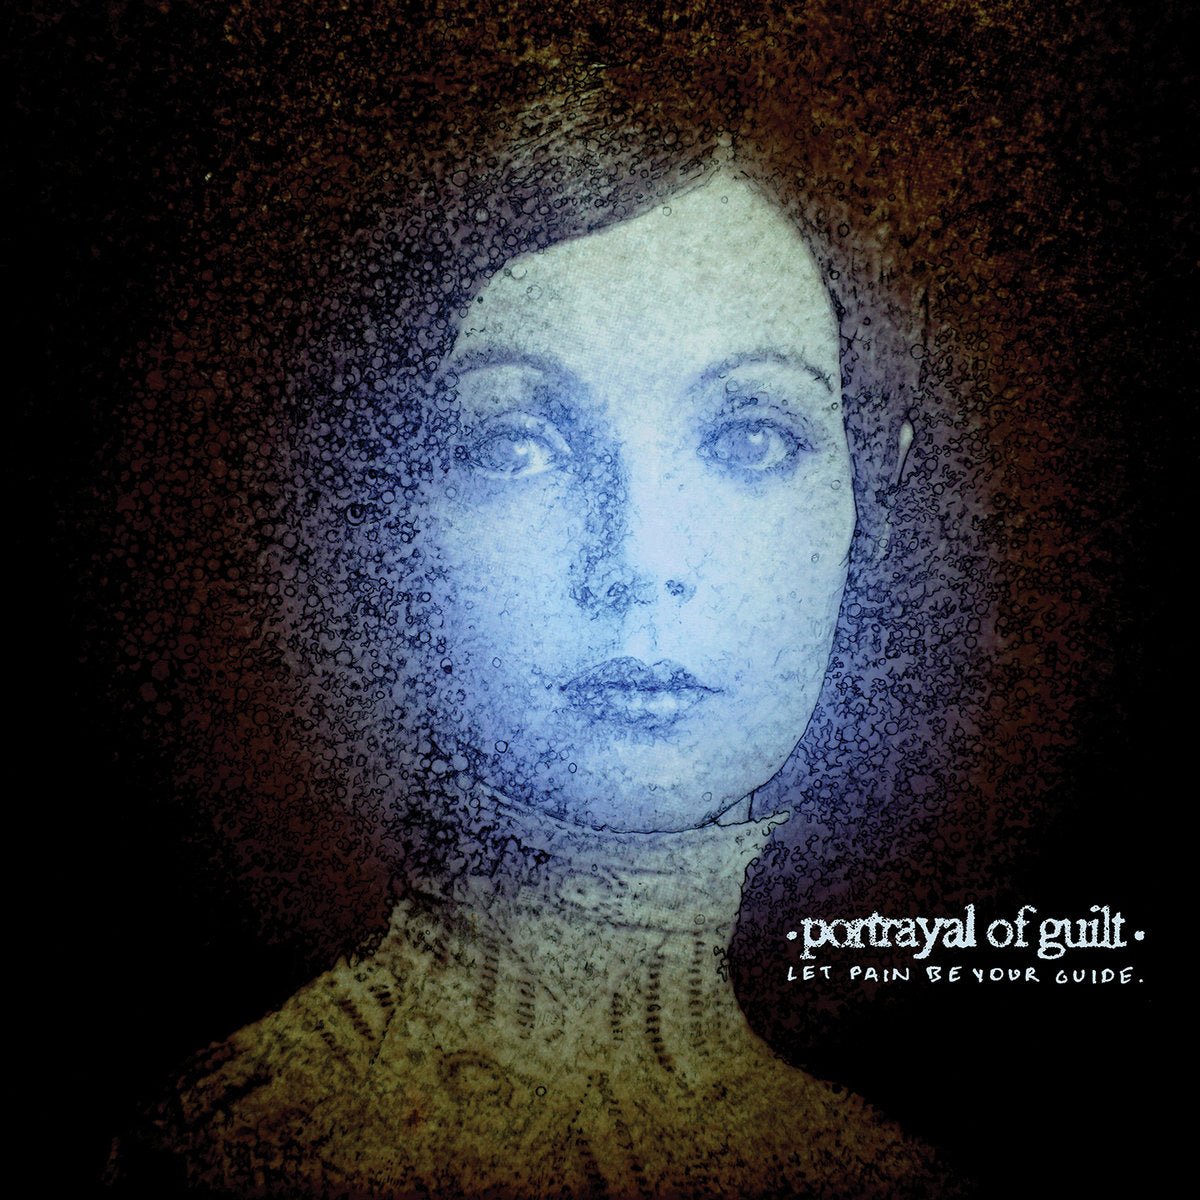 portrayal of guilt - Let Pain Be Your Guide LP - Vinyl - Gilead Media